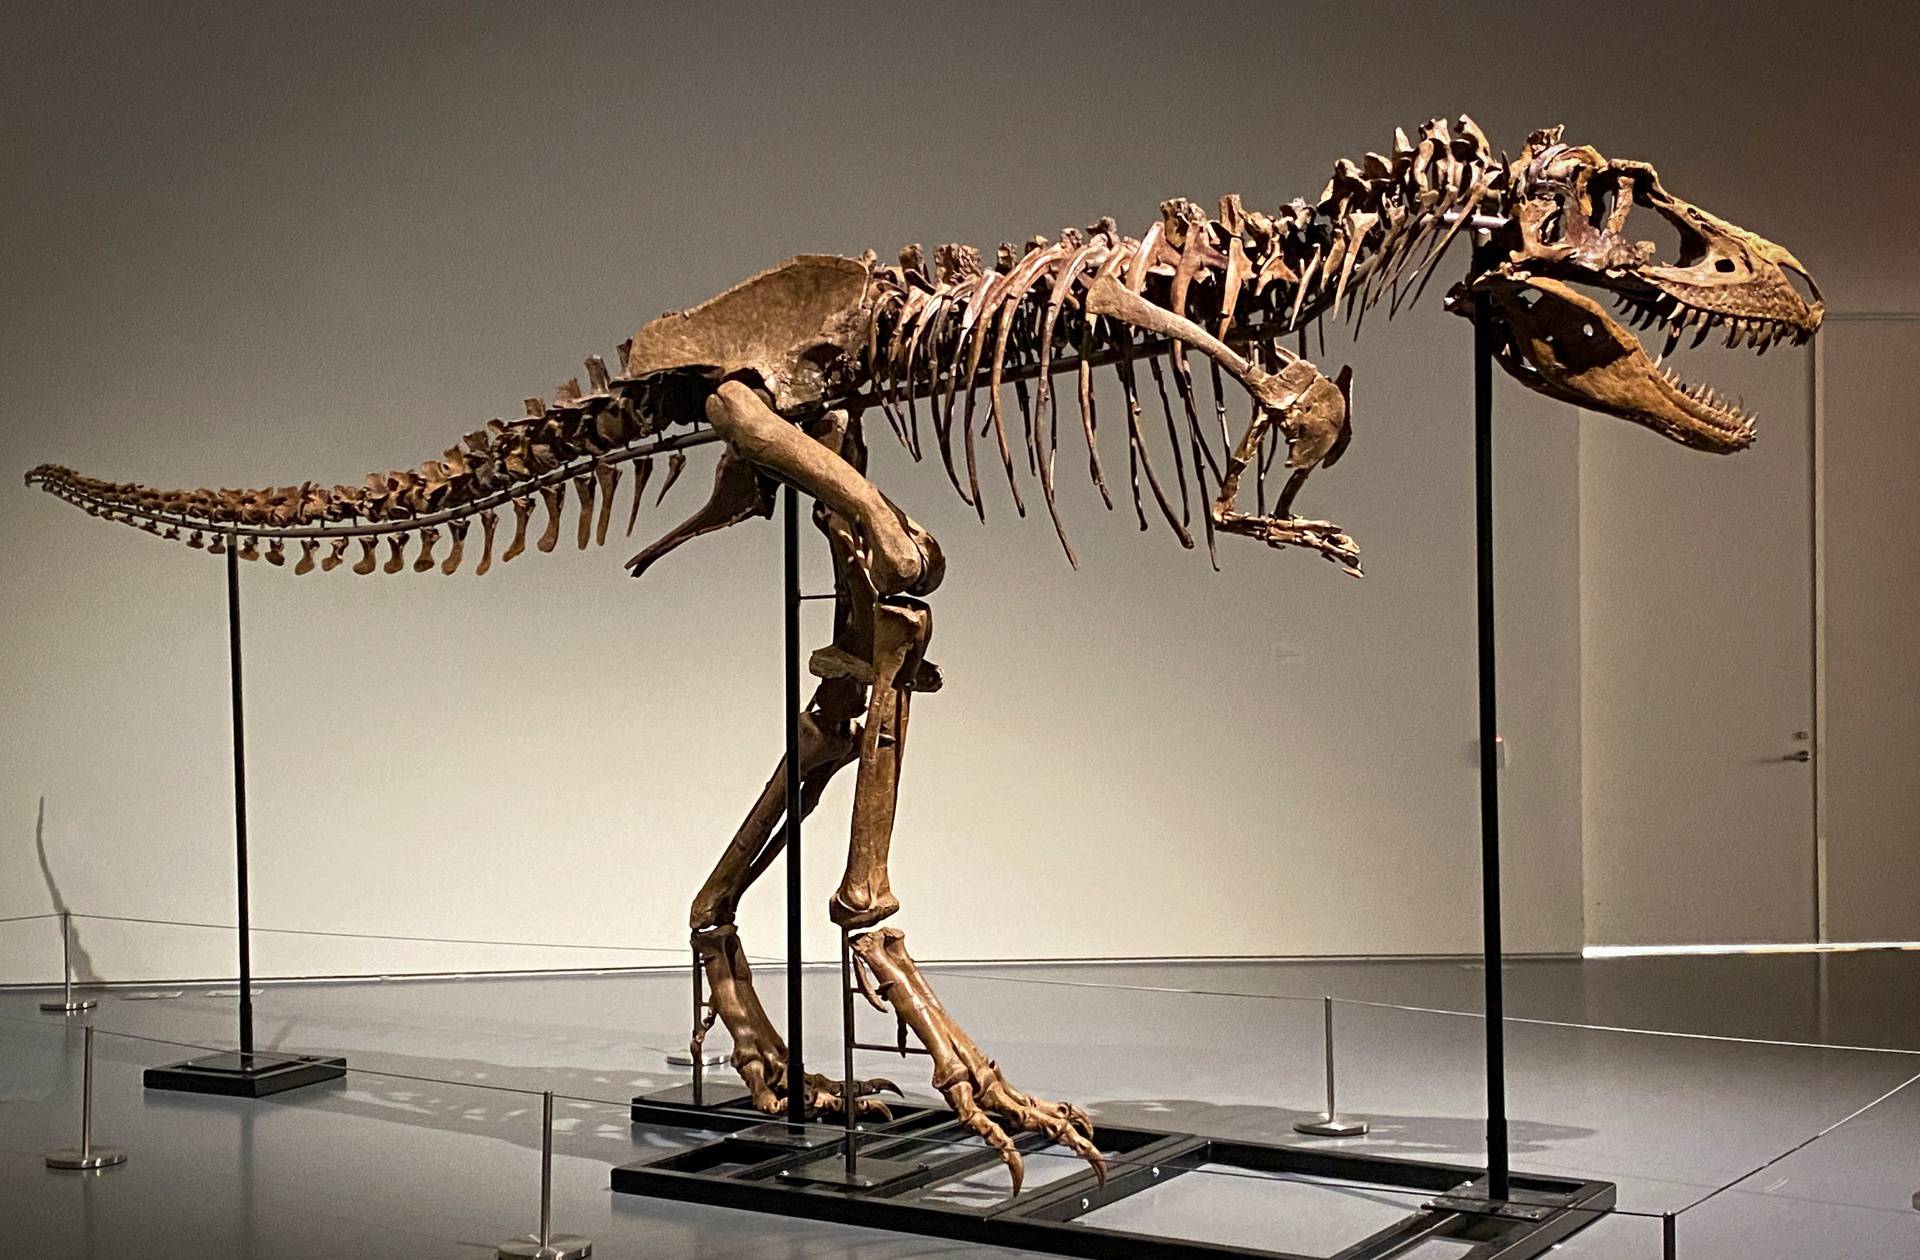 Gorgosaurus dinosaur skeleton to be auctioned by Sotheby's in New York